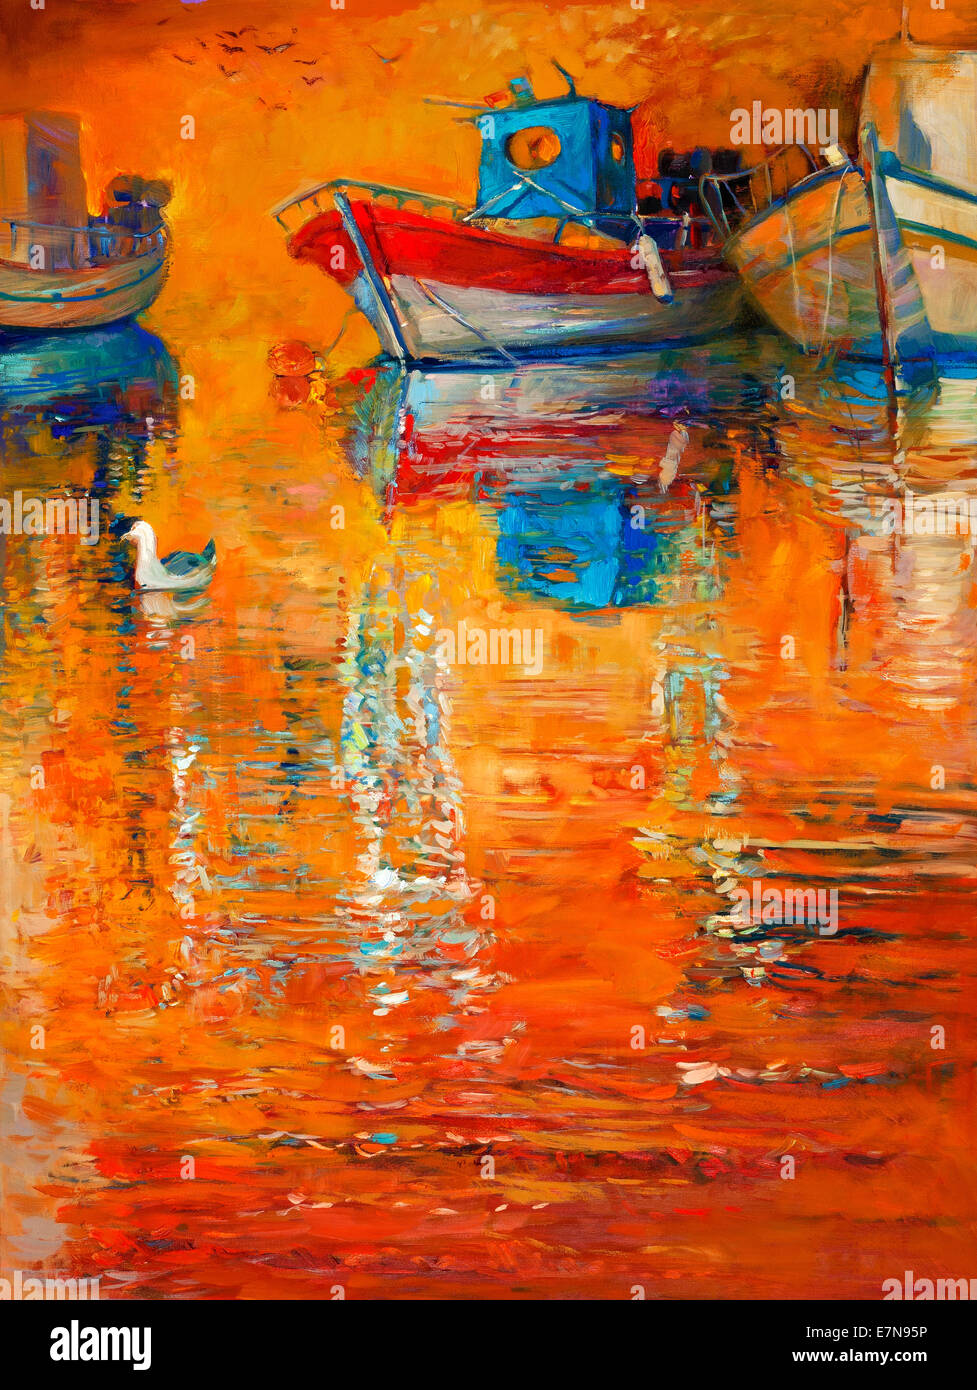 Original oil painting of fishing boats and sea on canvas.Rich golden Sunset over ocean.Modern Impressionism Stock Photo